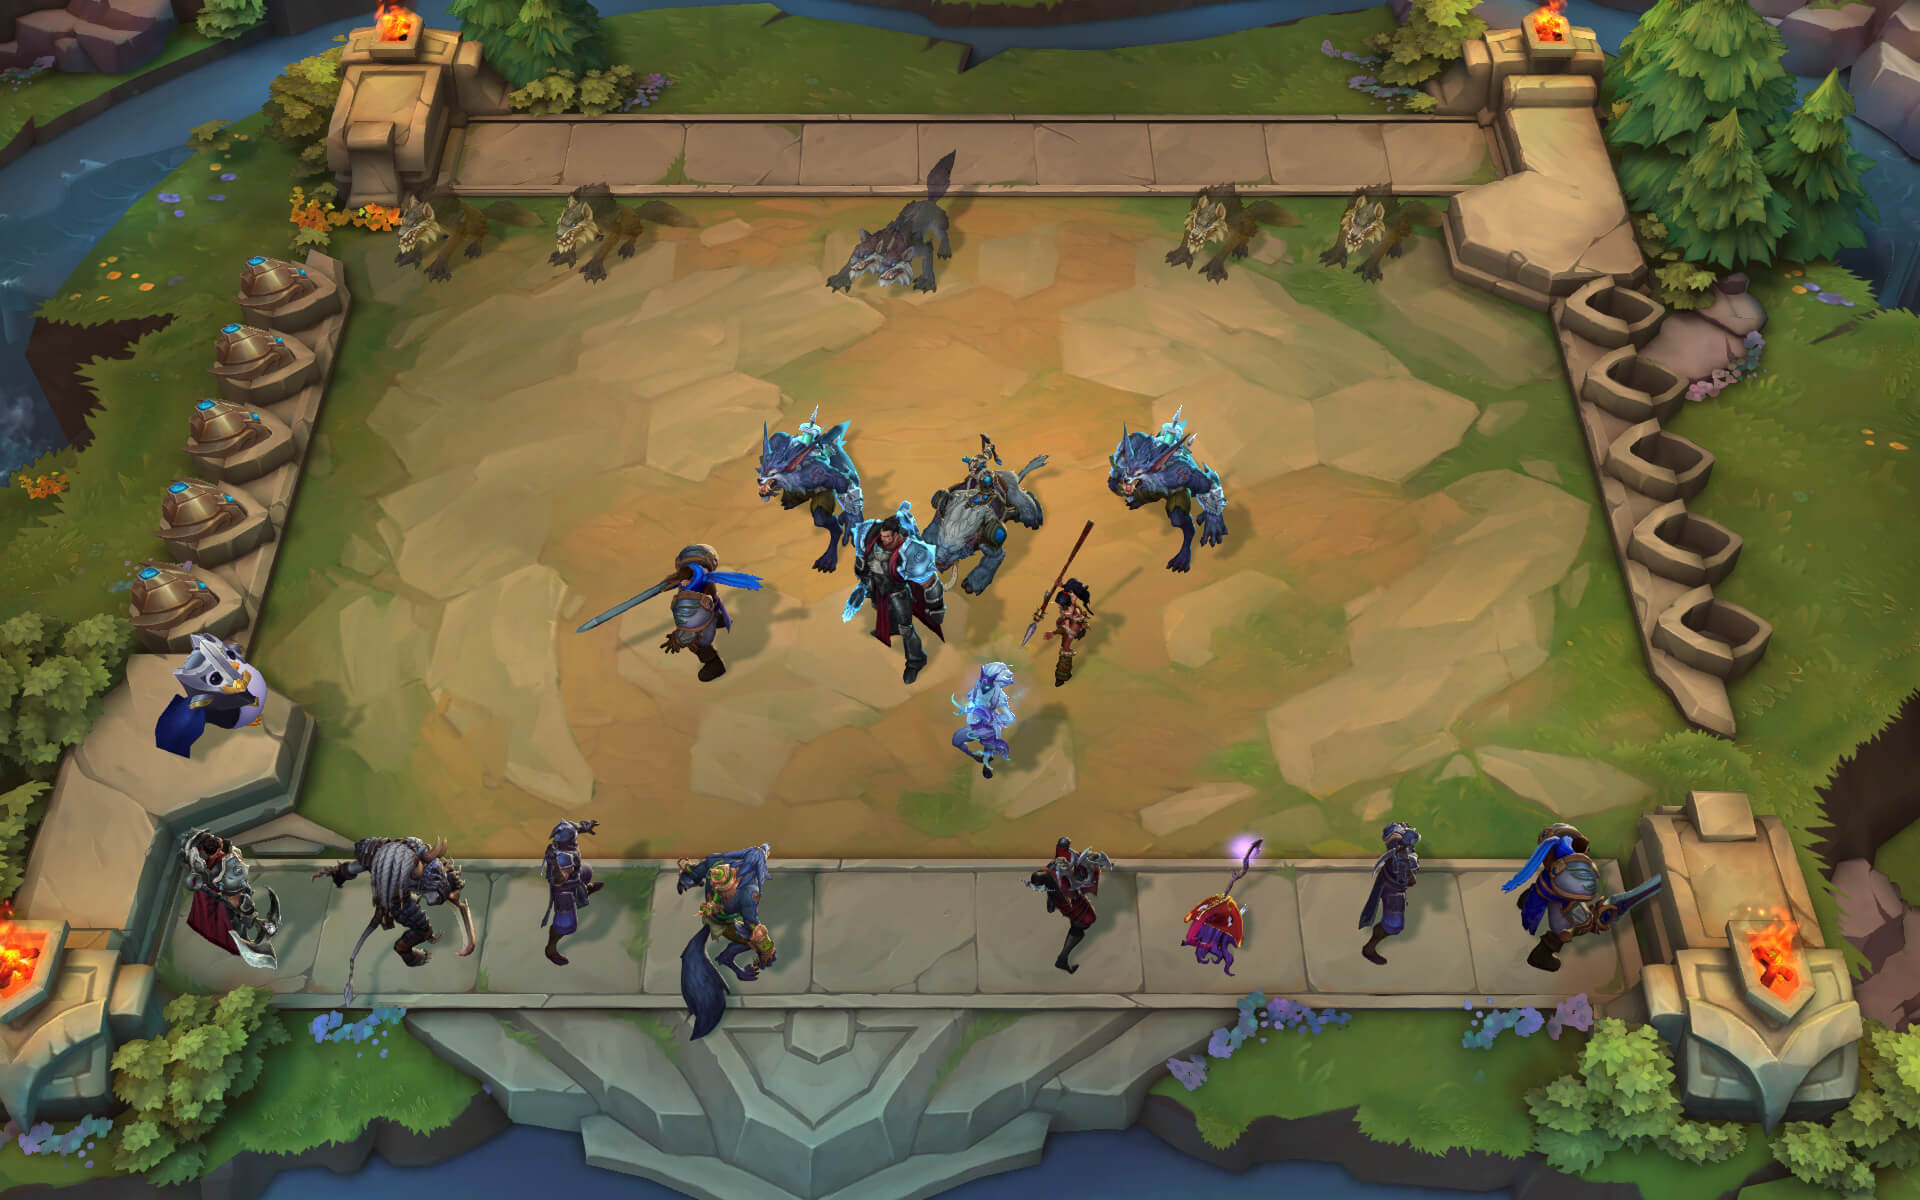 A Guide To Auto Chess, 2019's Most Popular New Game Genre